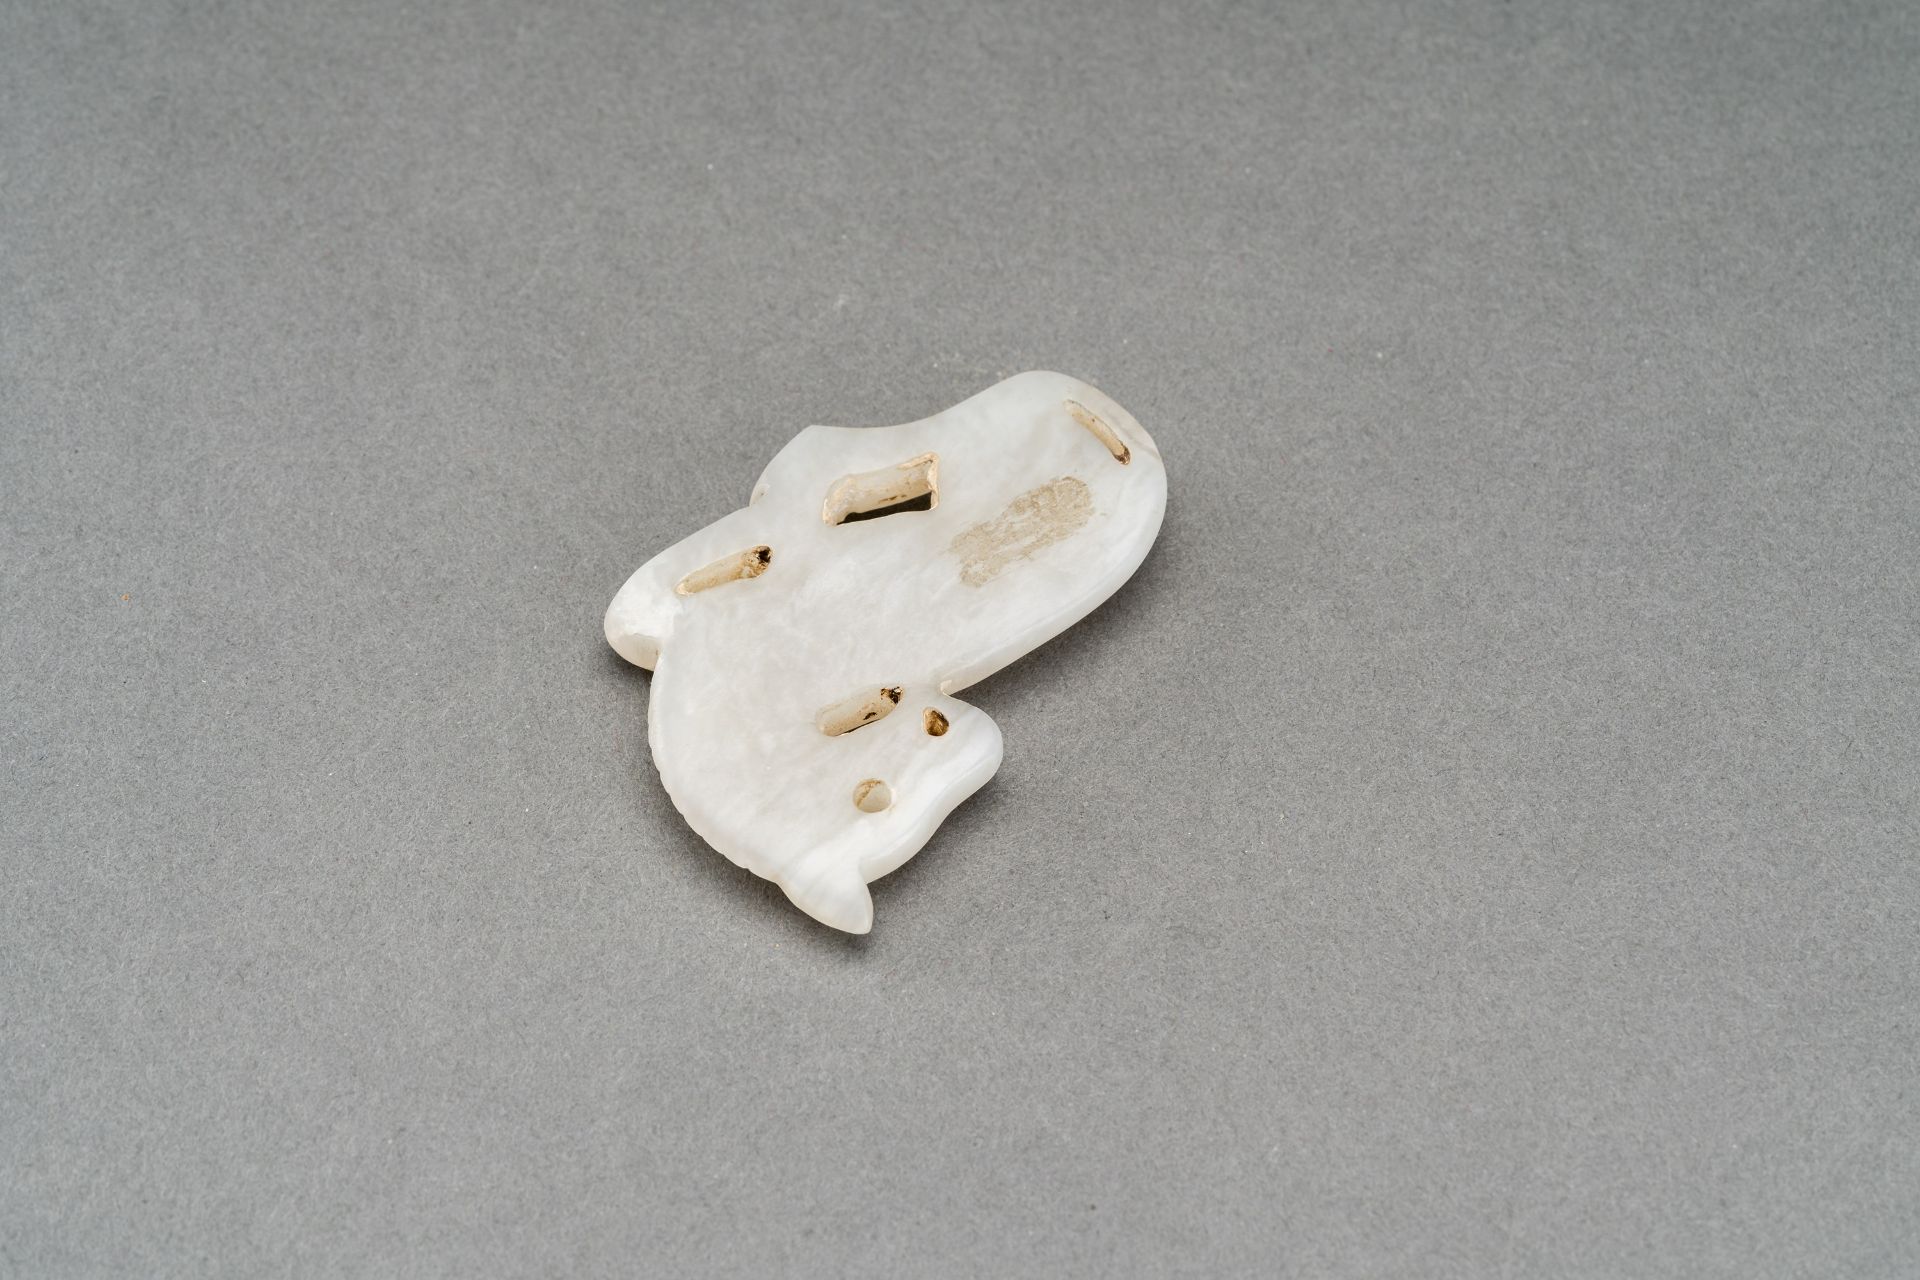 A GRAY JADE PENDANT OF A RECUMBENT HORSE, c. 1920s - Image 3 of 7